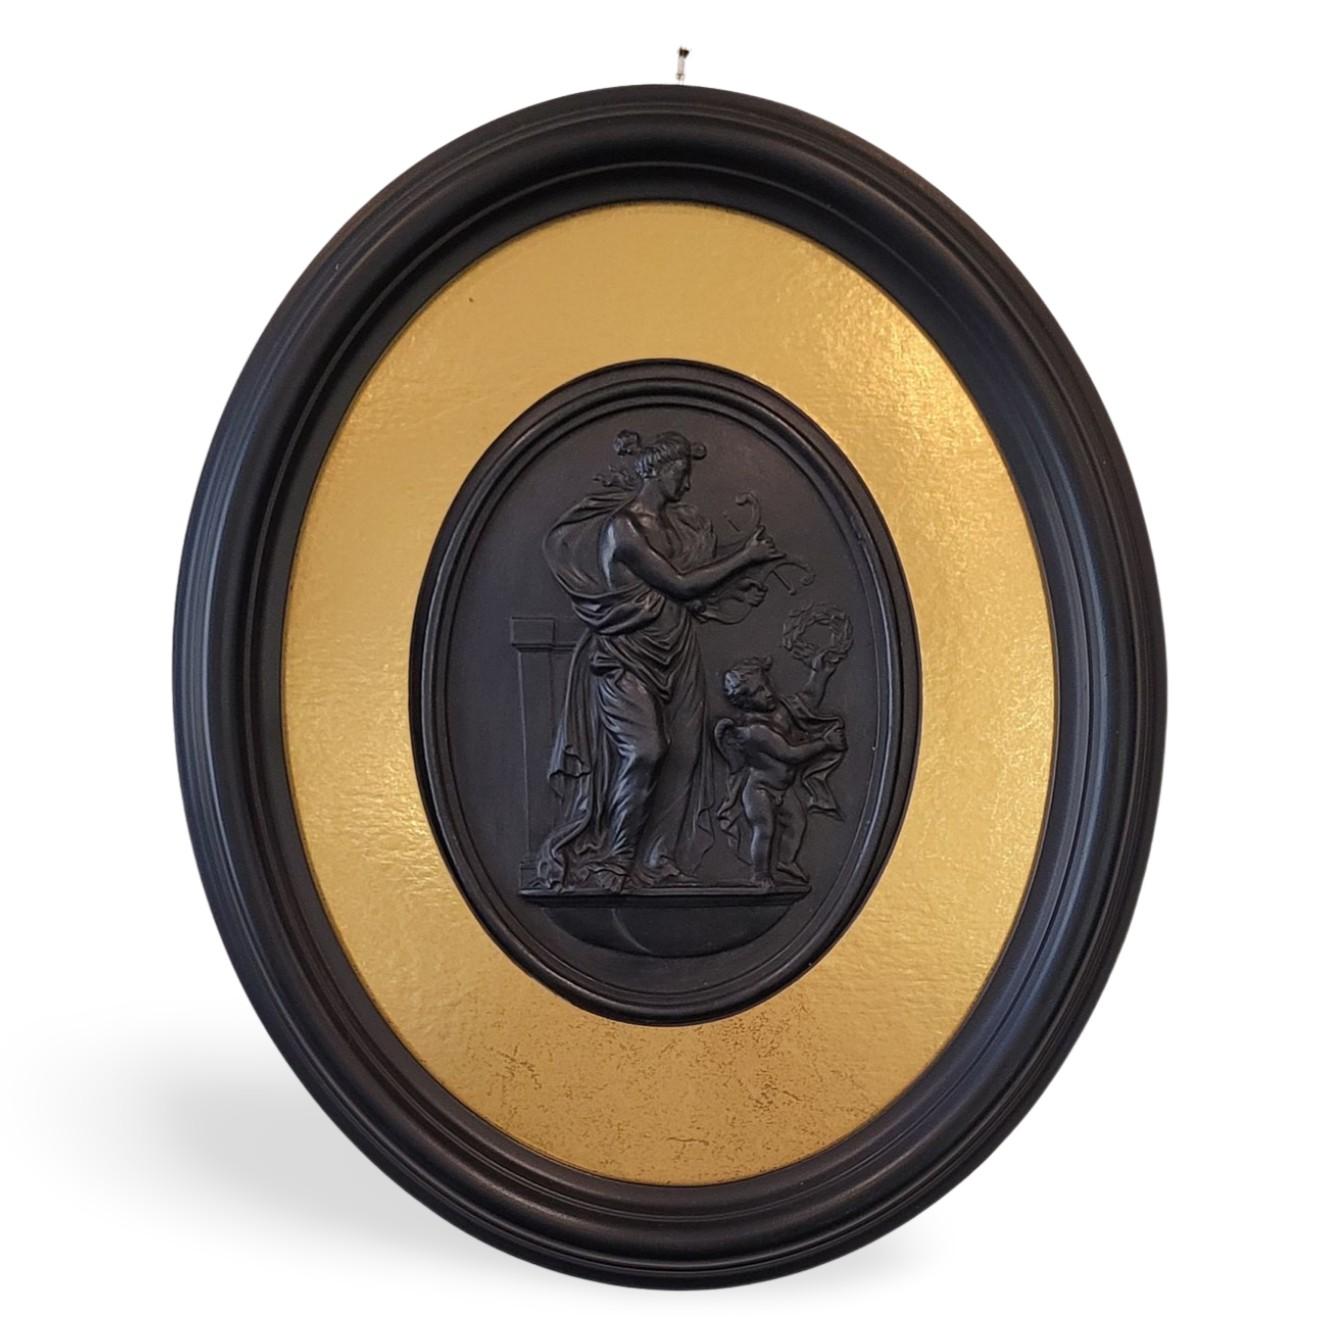 A pair of black basalt medallions, depicting Venus & Cupid, as Day and Night. Day shows Venus and Cupid with symbols of victory; night shows Venus offering poppies, which are symbolic of sleep, as they are the source of opium.

Recently framed, and